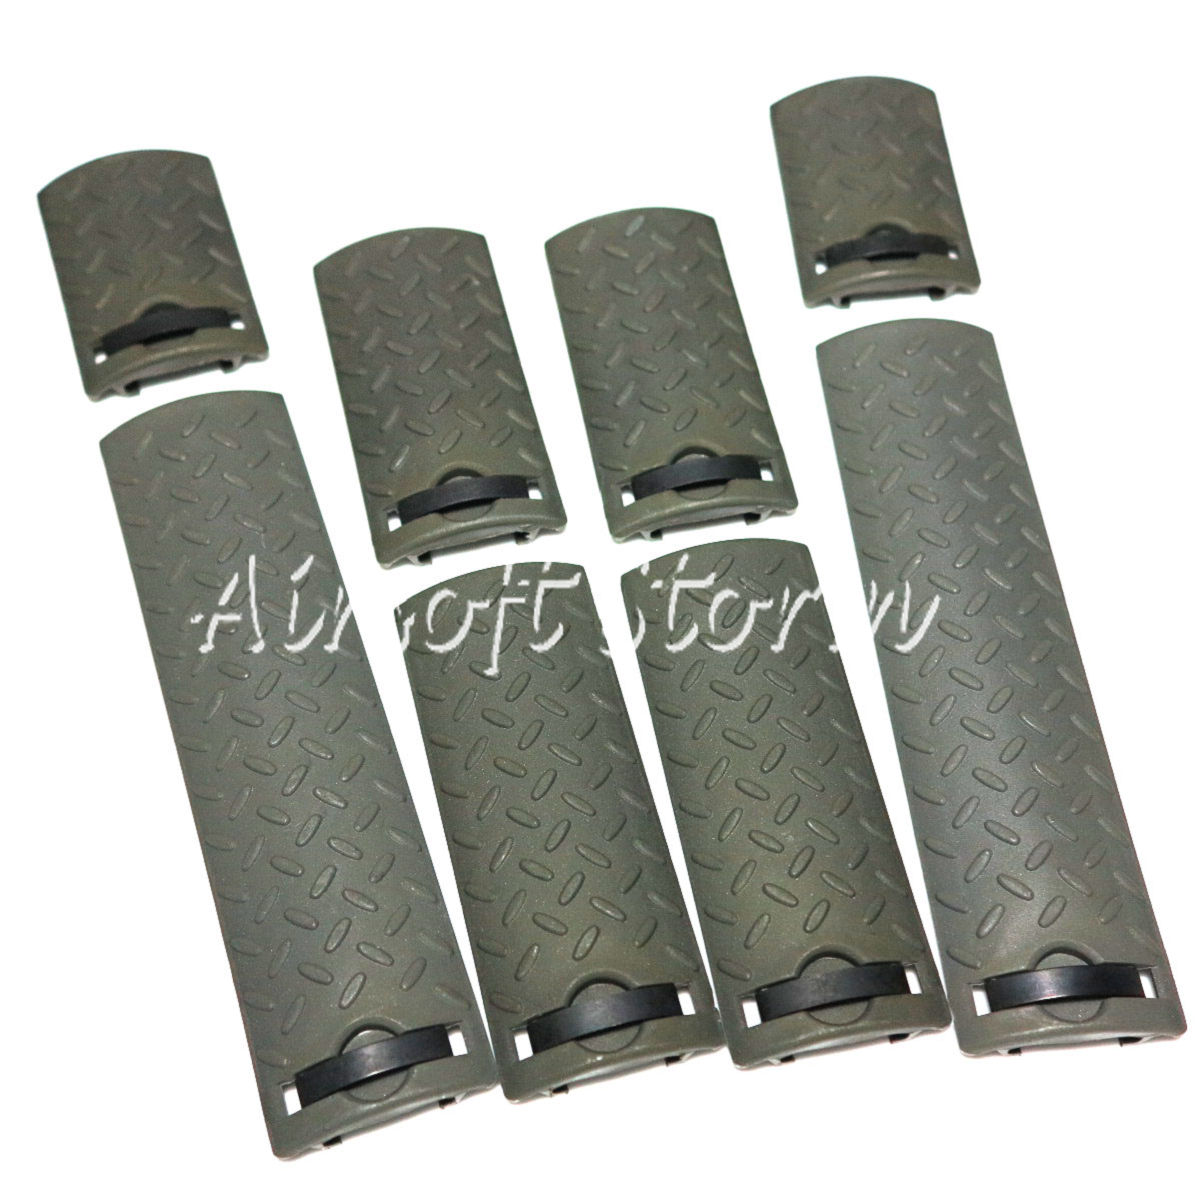 Shooting Tactical Gear 8pcs Set ENERGY Skidproof Texture Type Rail Cover Panel ACU Foliage Green